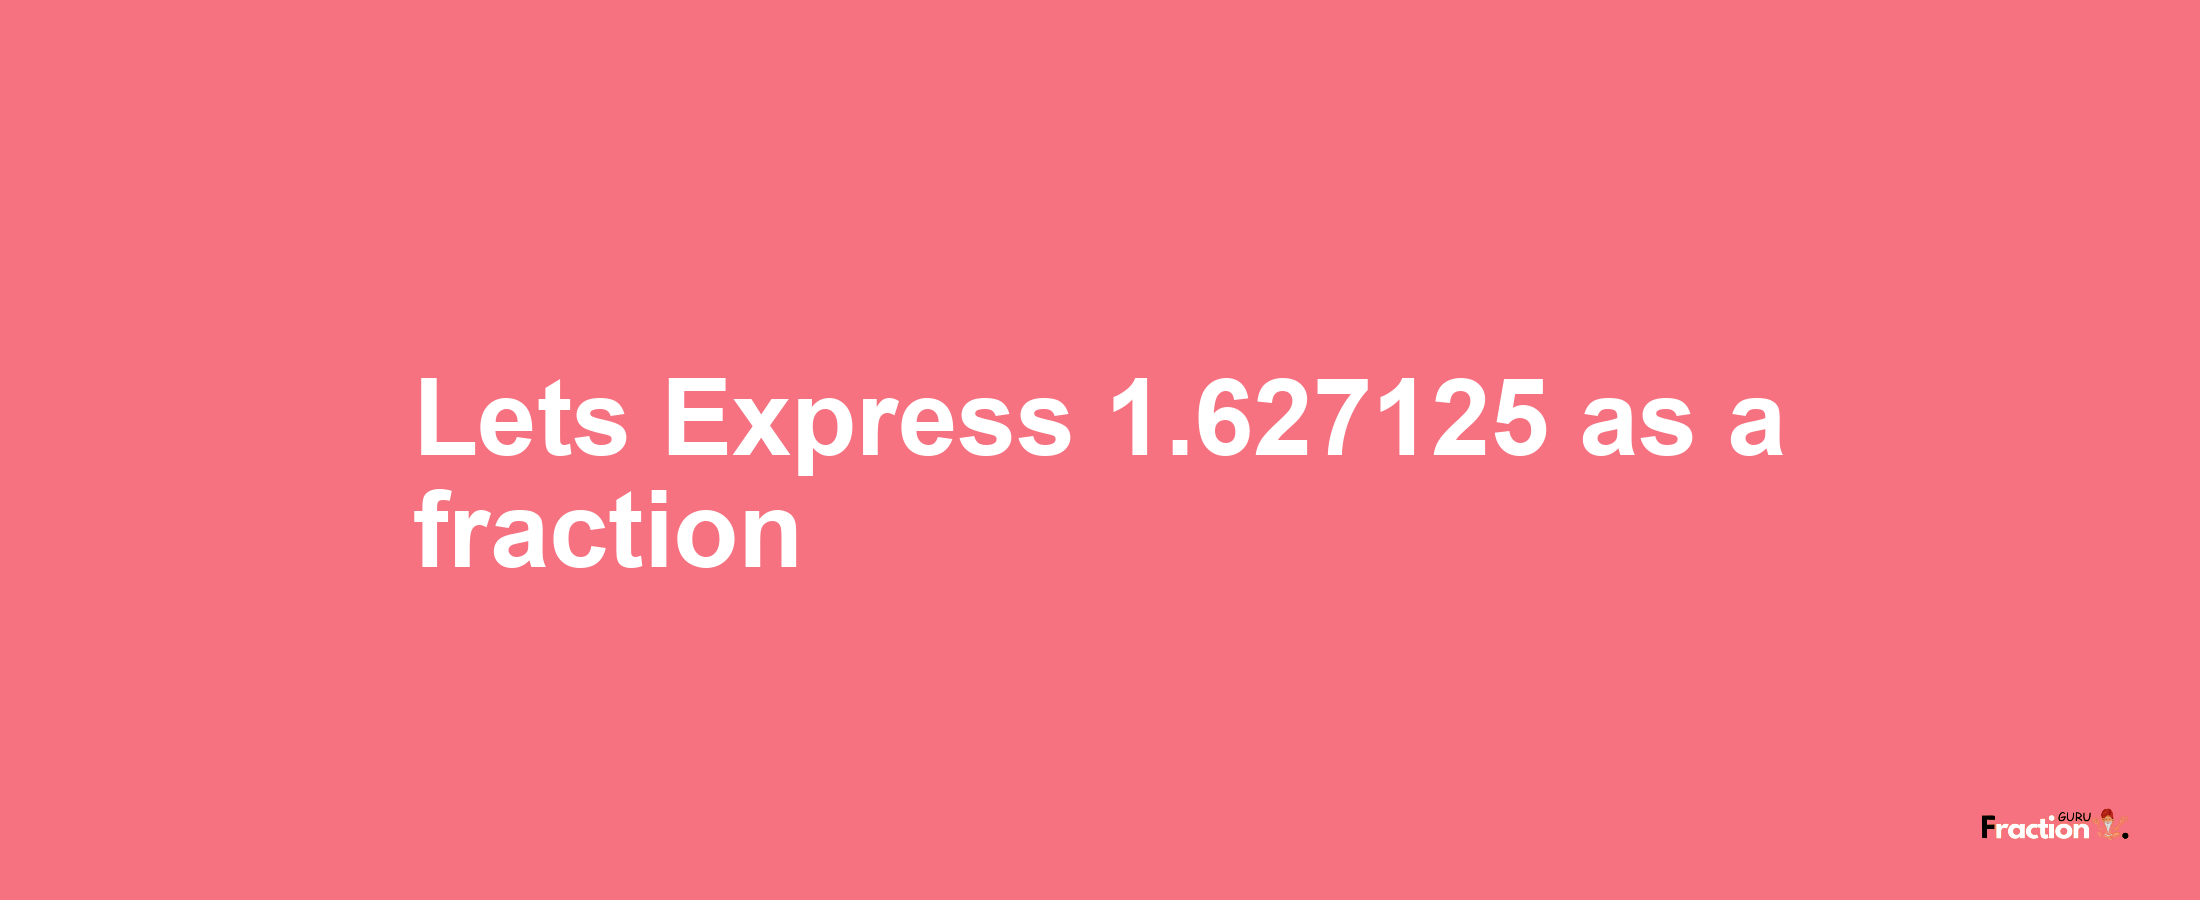 Lets Express 1.627125 as afraction